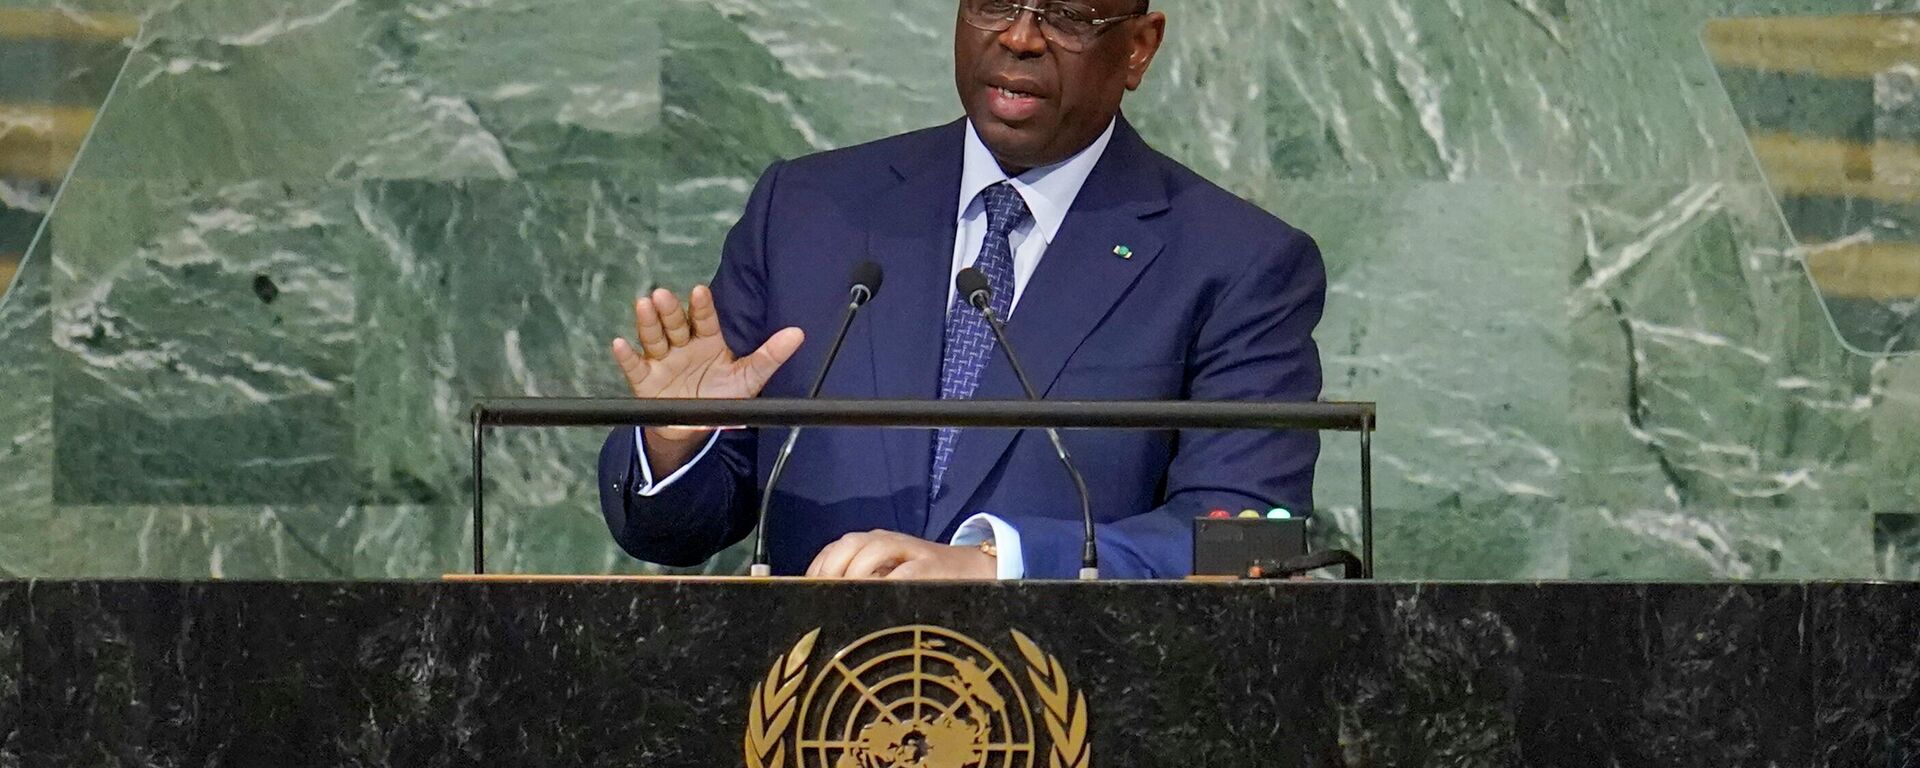 President of Senegal and African Union chairperson Macky Sall addresses the 77th session of the General Assembly at United Nations headquarters, Tuesday, Sept. 20, 2022. - Sputnik International, 1920, 20.09.2022